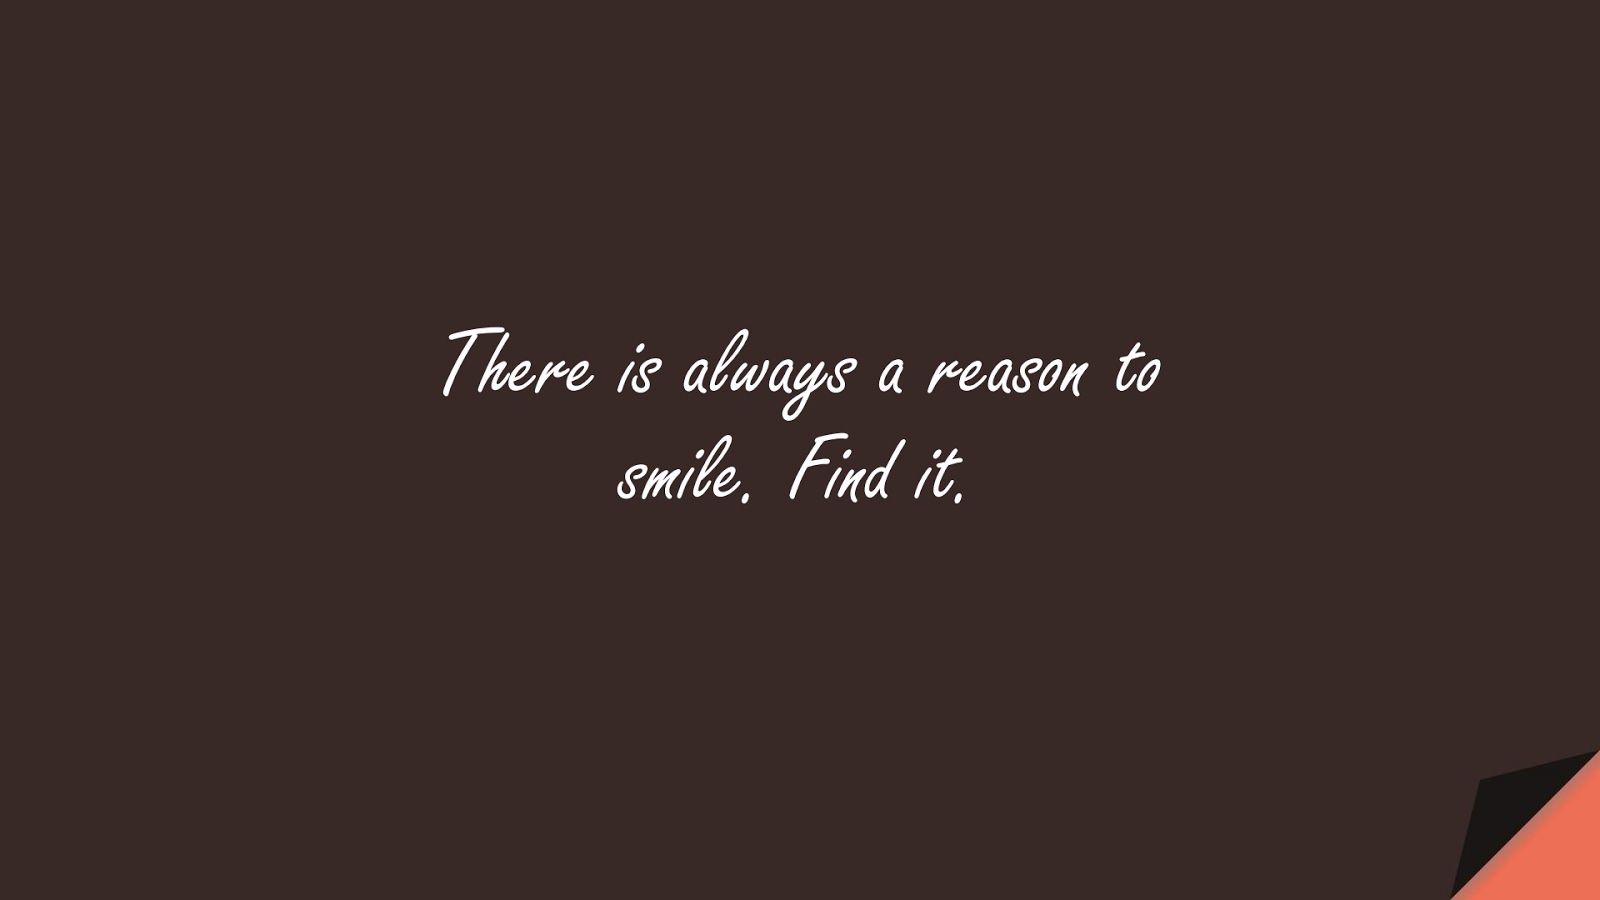 There is always a reason to smile. Find it.FALSE